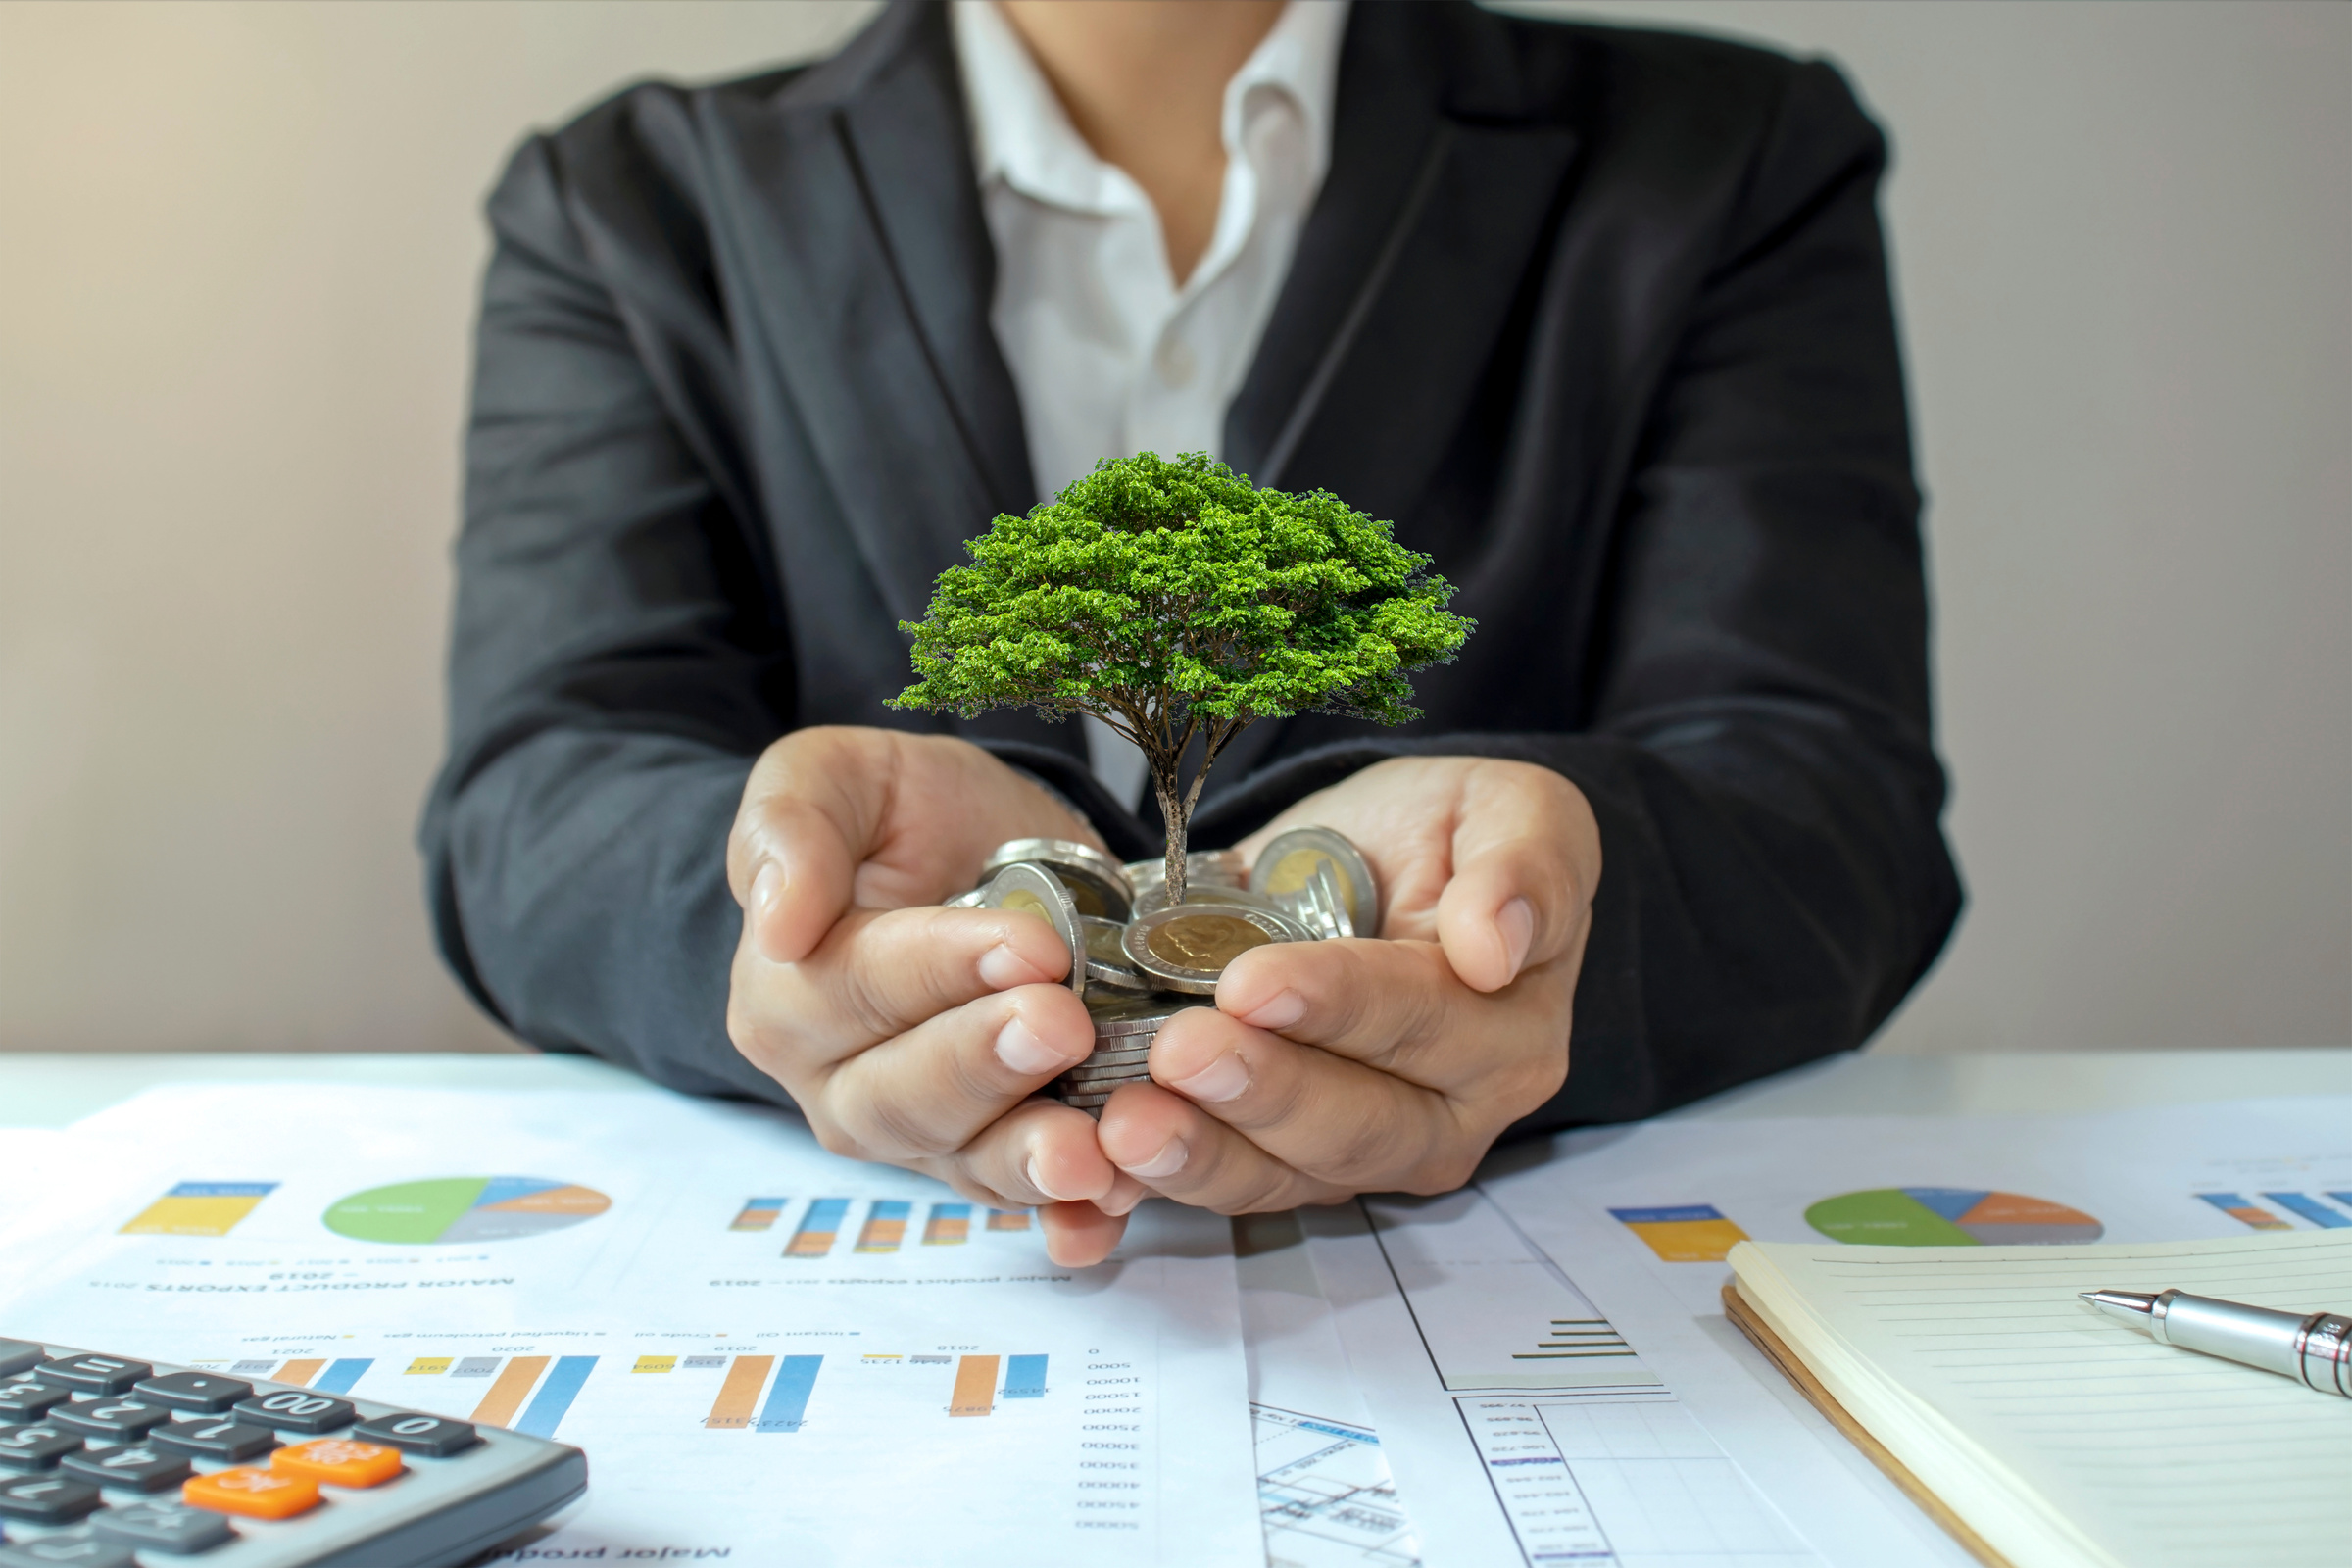 Little Tree Grows on Coin in the Hands of Businessman